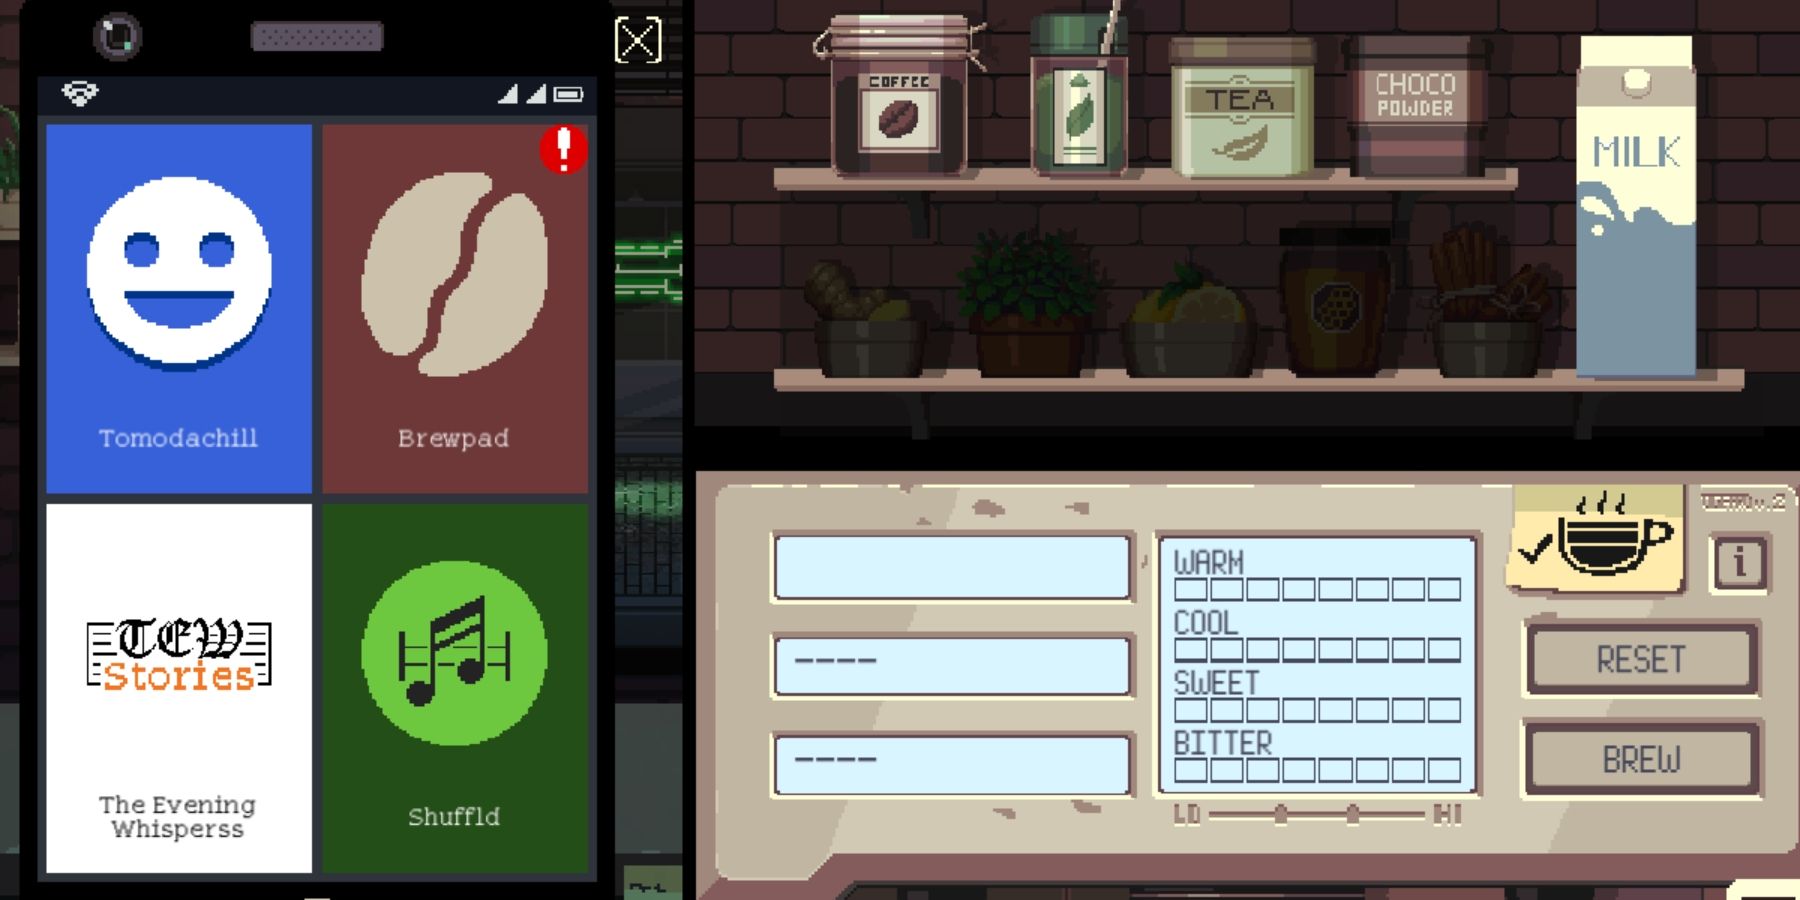 The player's Smartphone display to the left of the ingredients shelves and the coffee brewer. Image credit: Terrence Smith